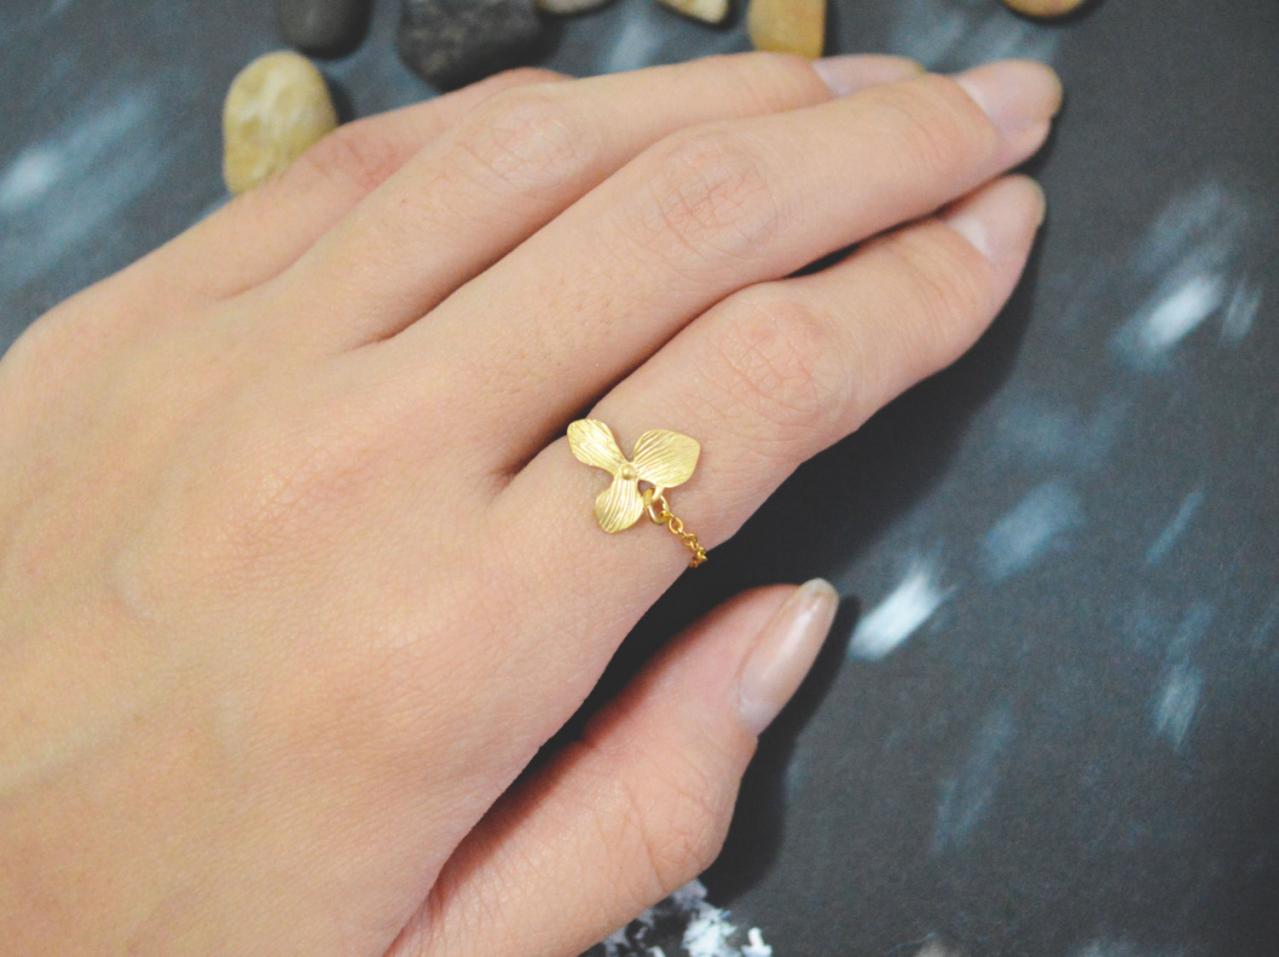 Flower ring,Chain ring, Gold plated orchid ring,Orchid ring, Simple ring